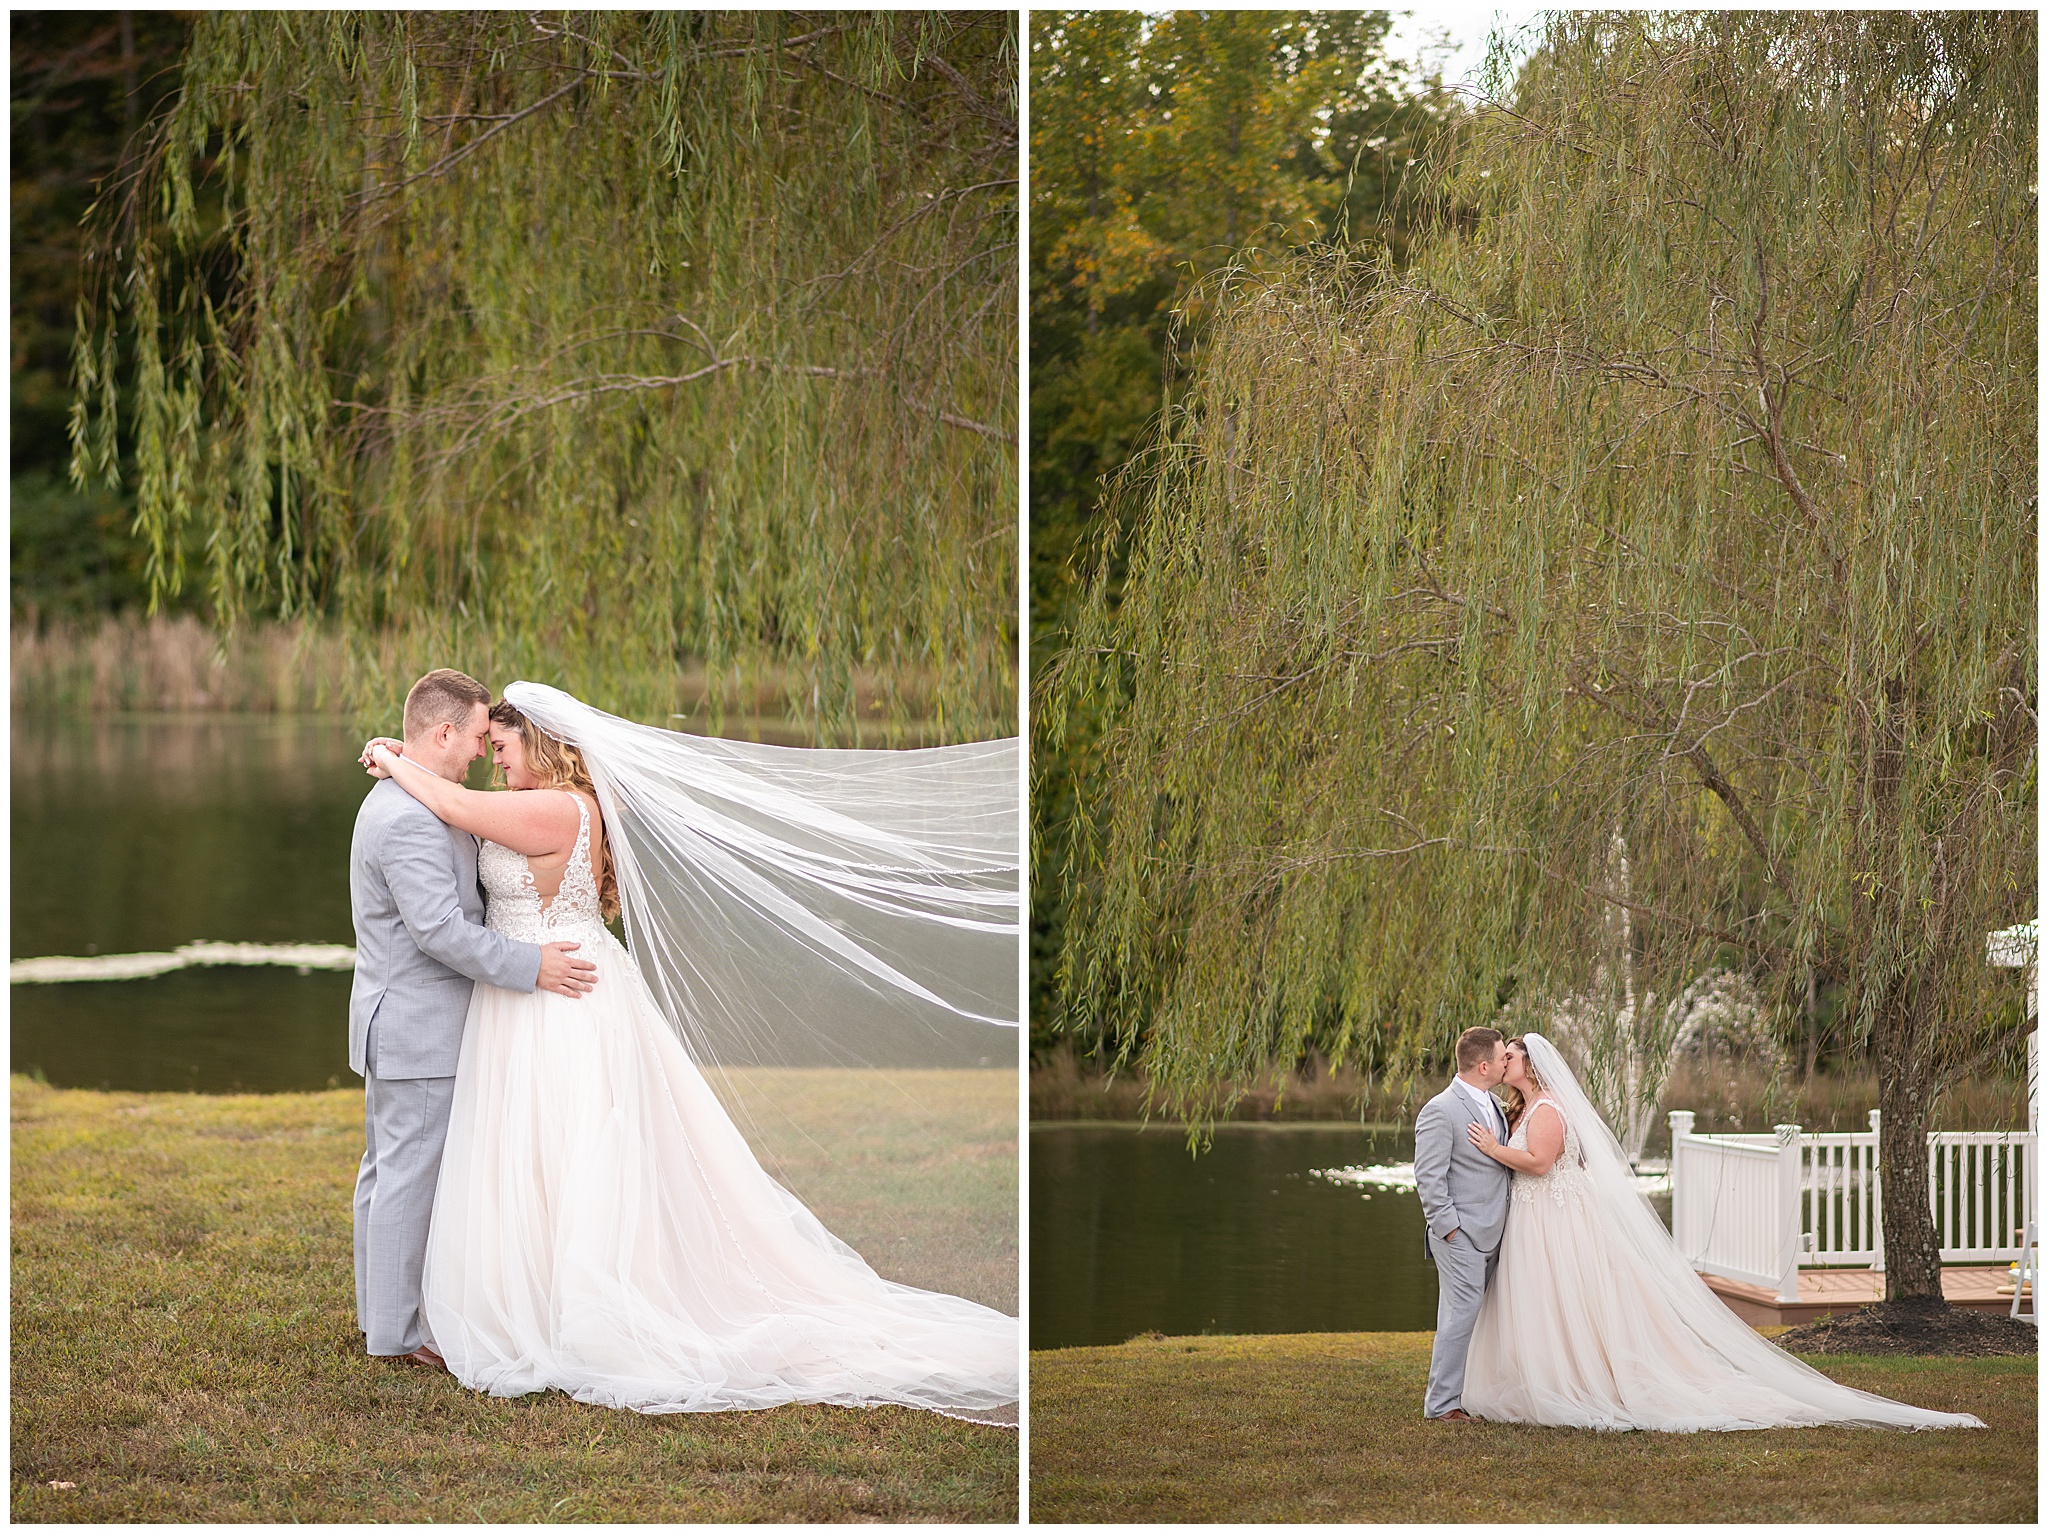 Newlyweds dance under a willow tree by a lake while the bride's veil flies behind her